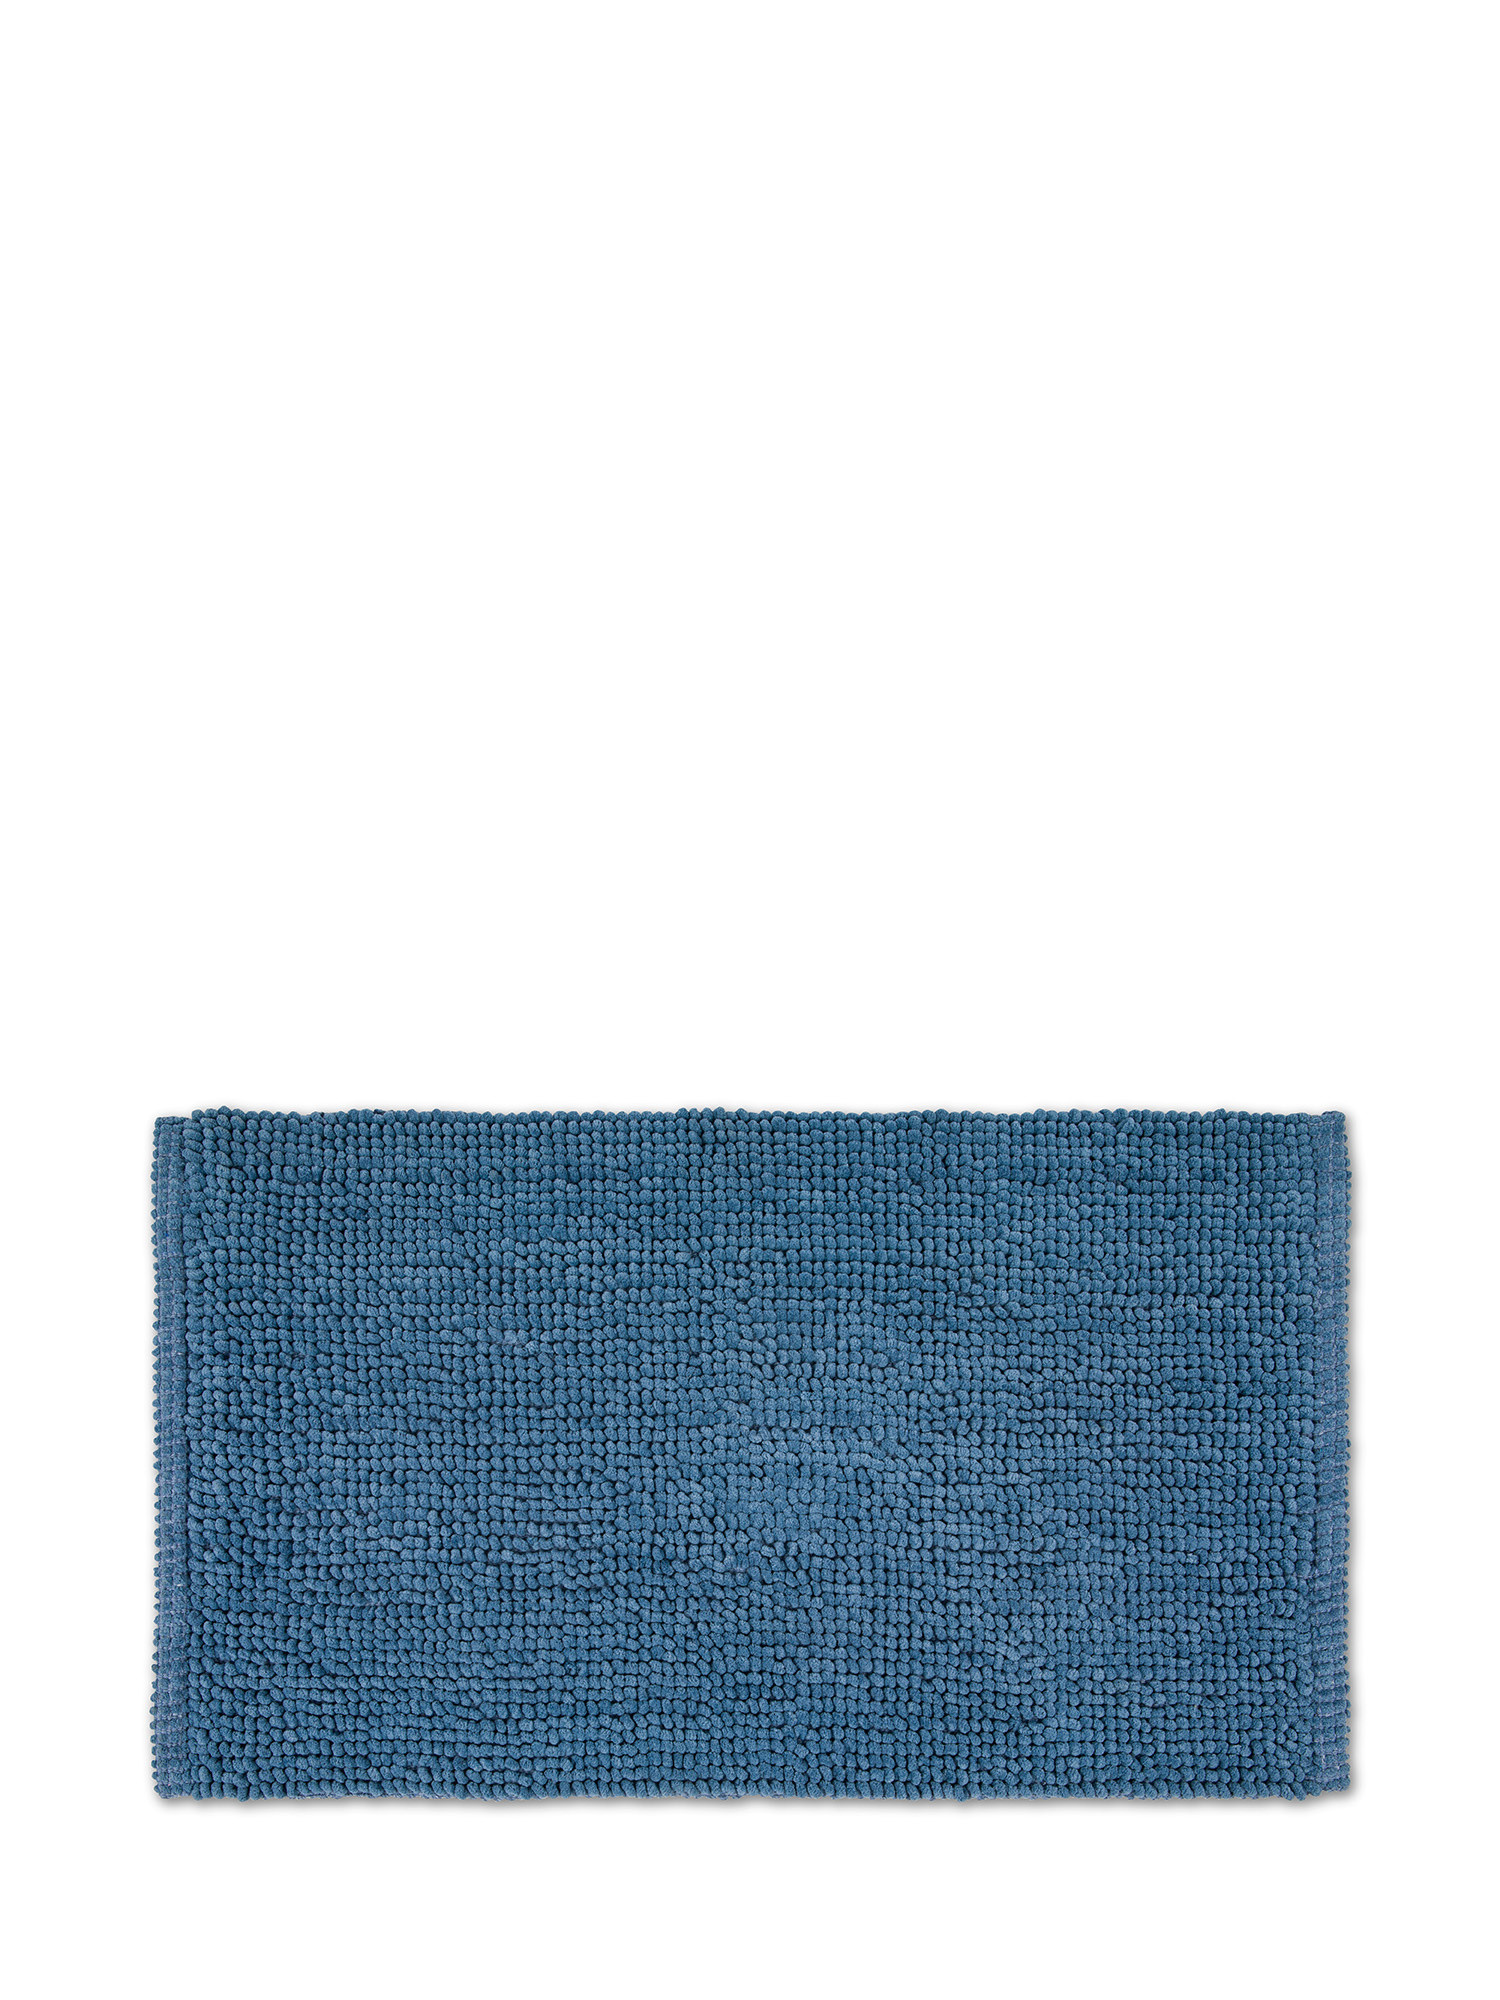 Shaggy effect chenille bathroom rug, Blue, large image number 0